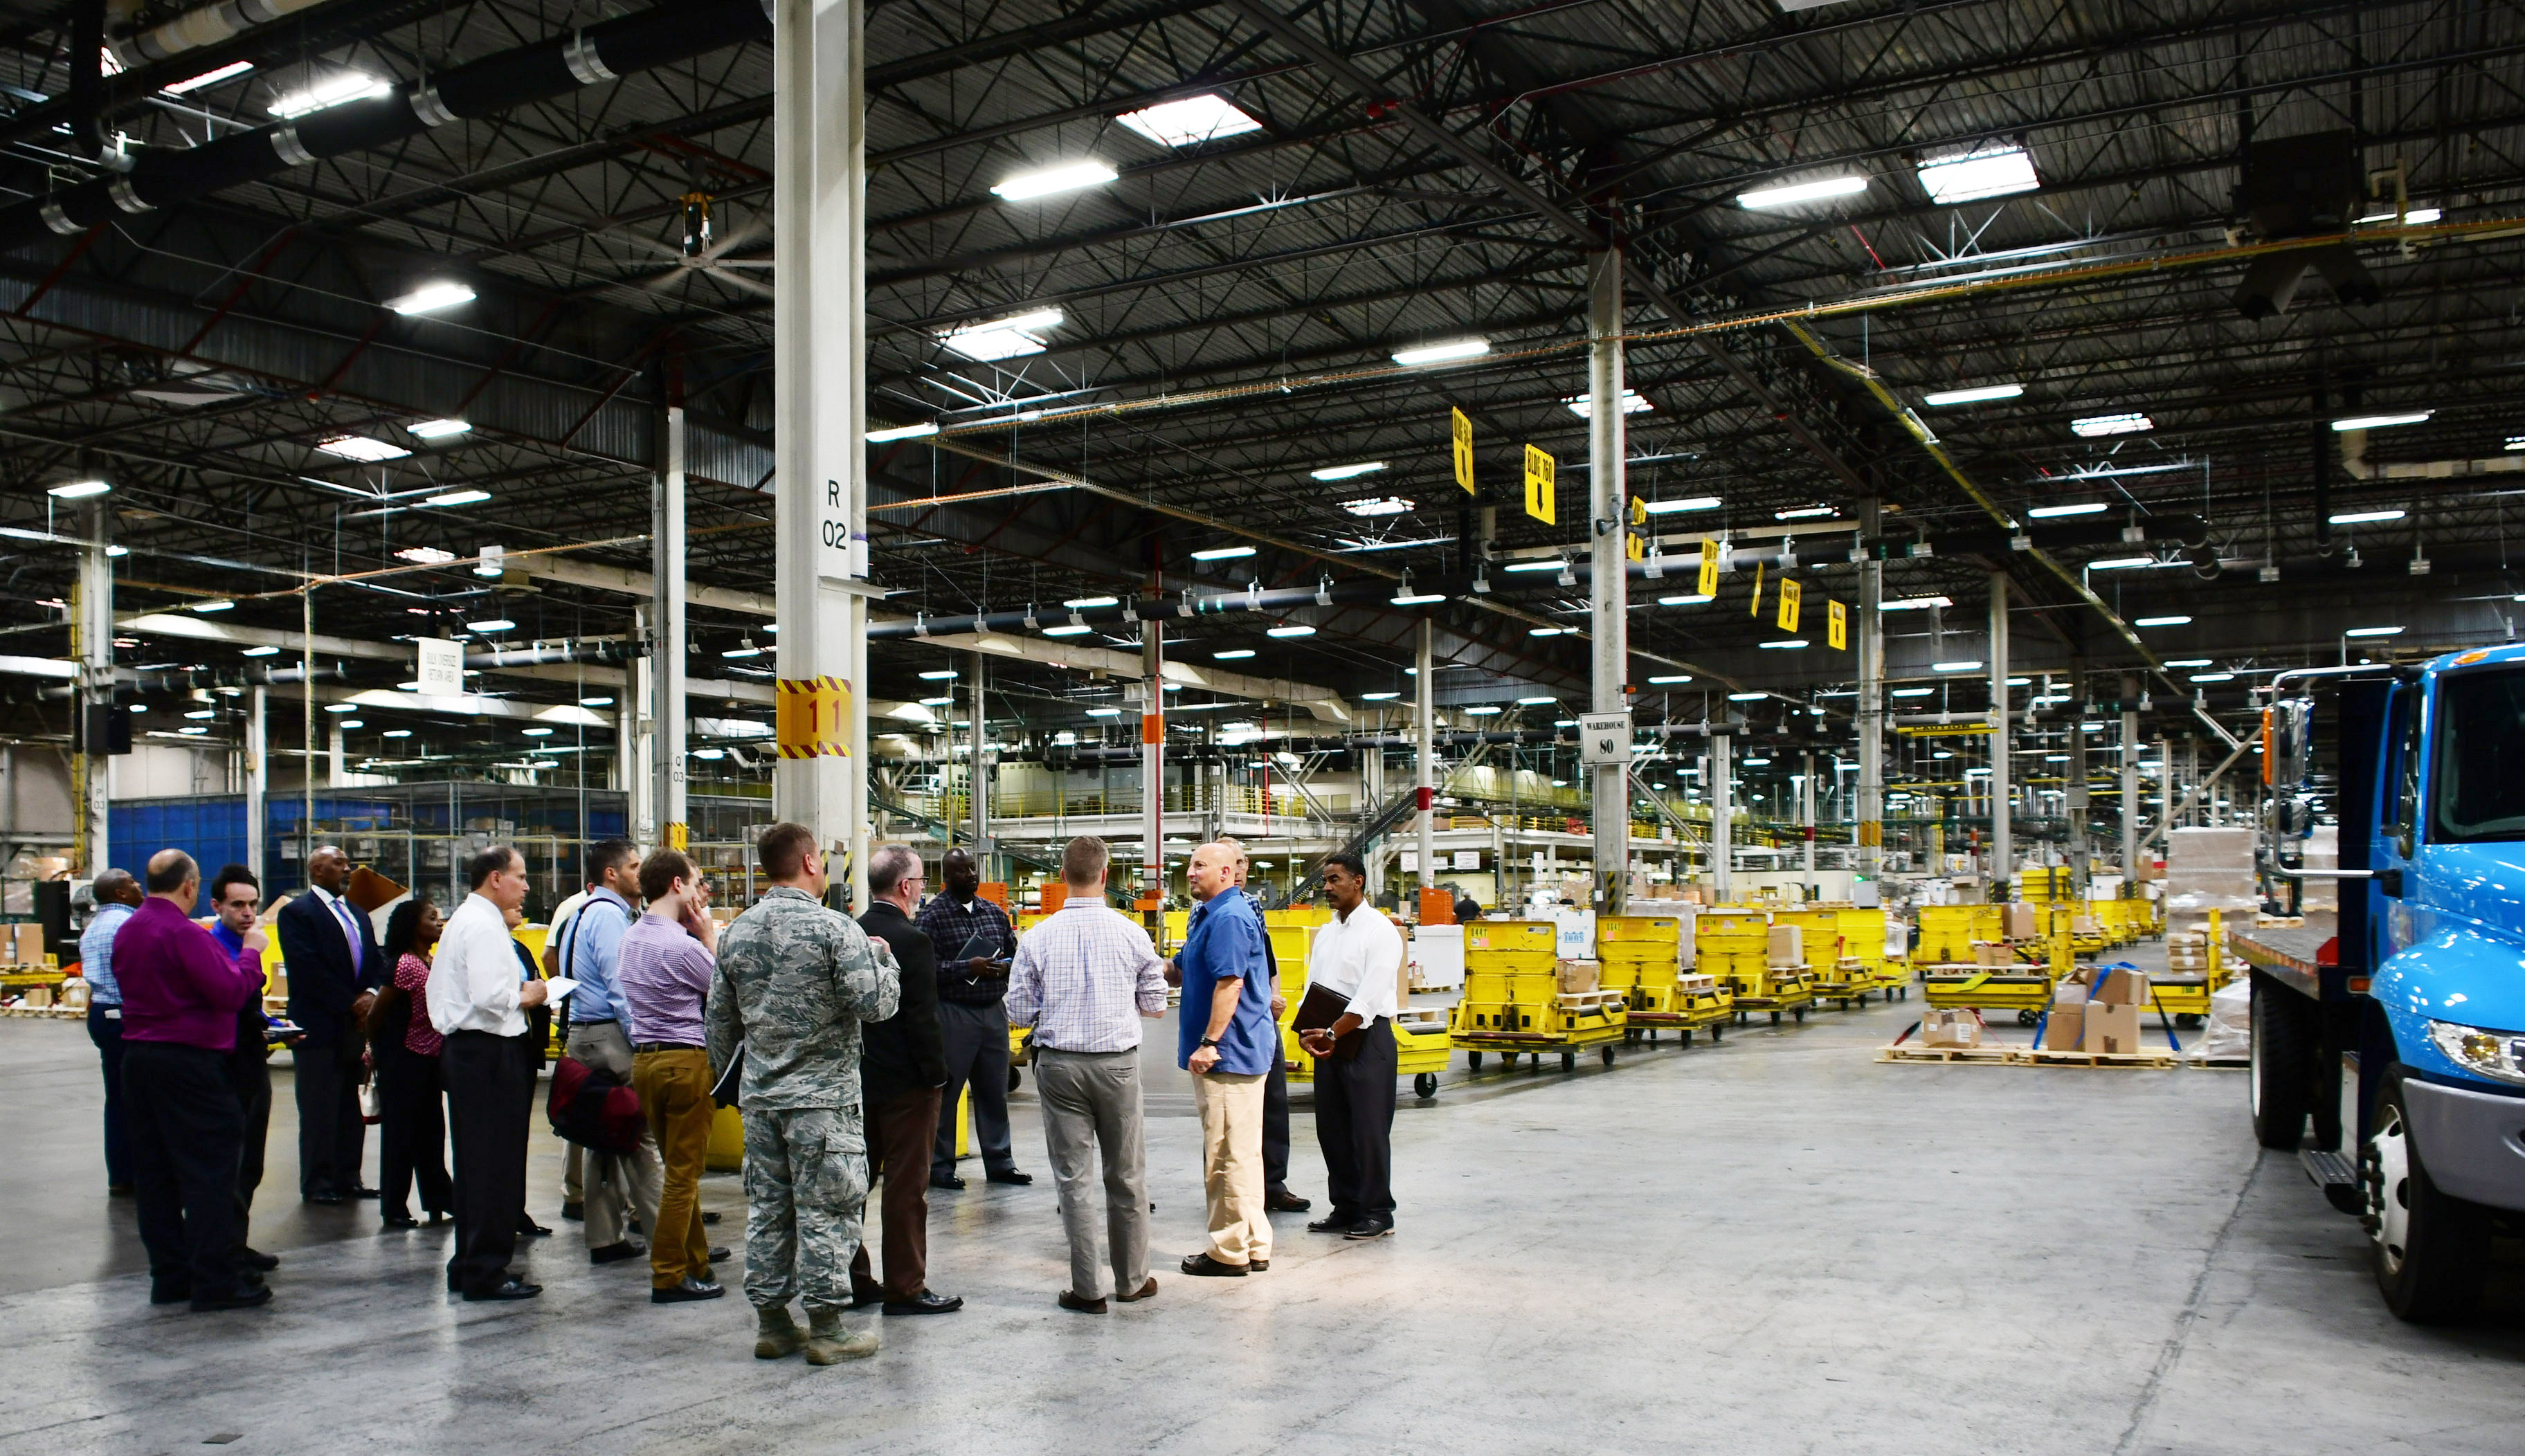 A group is gathered in a warehouse, showing the expanse of the warehouse behind them